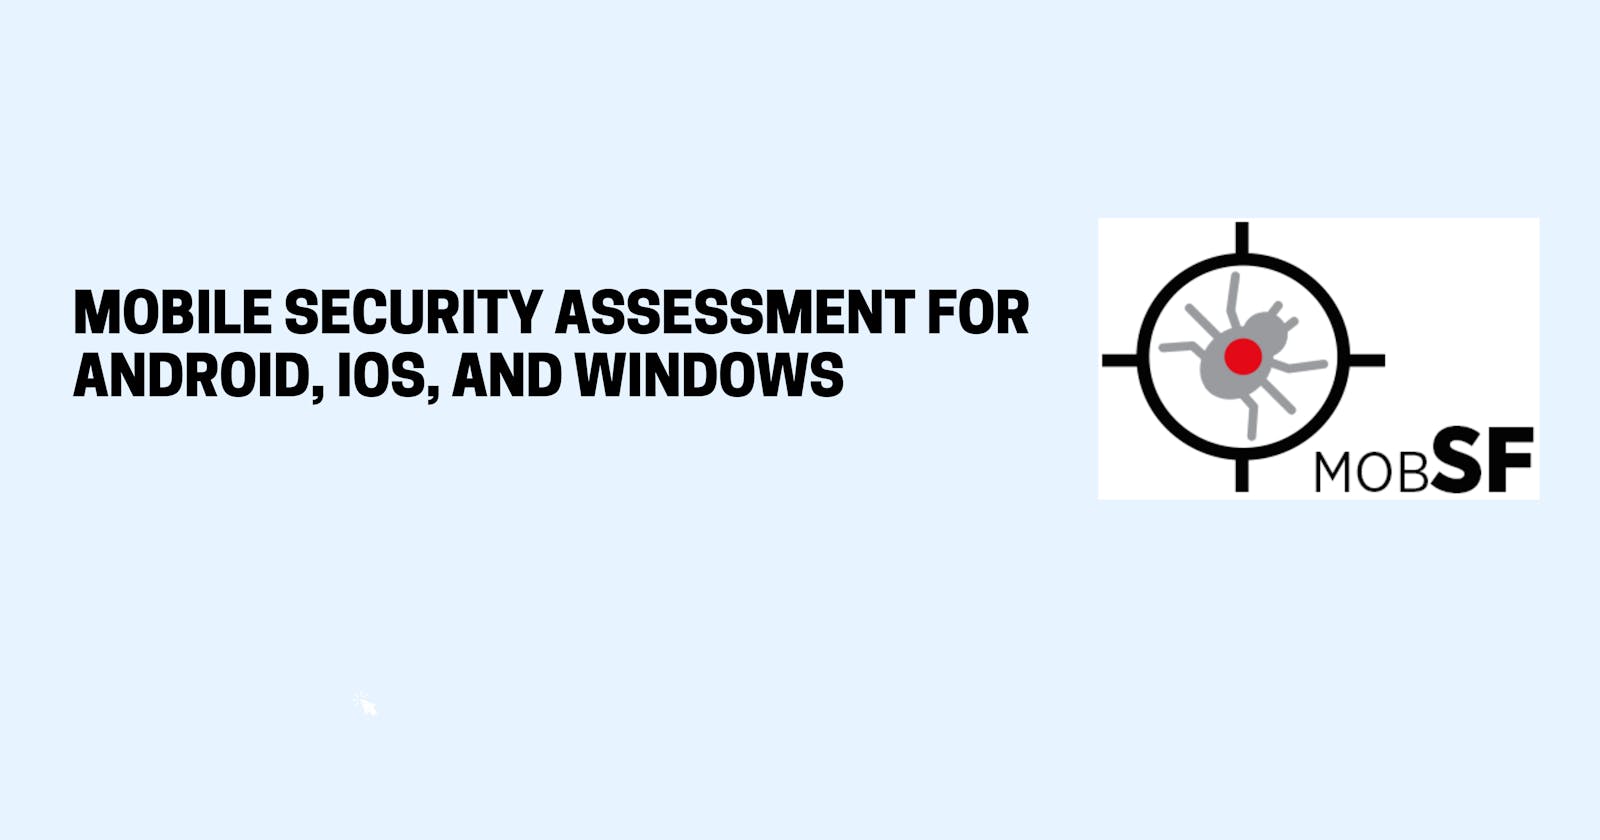 Mobile Security Assessment for Android, iOS, and Windows